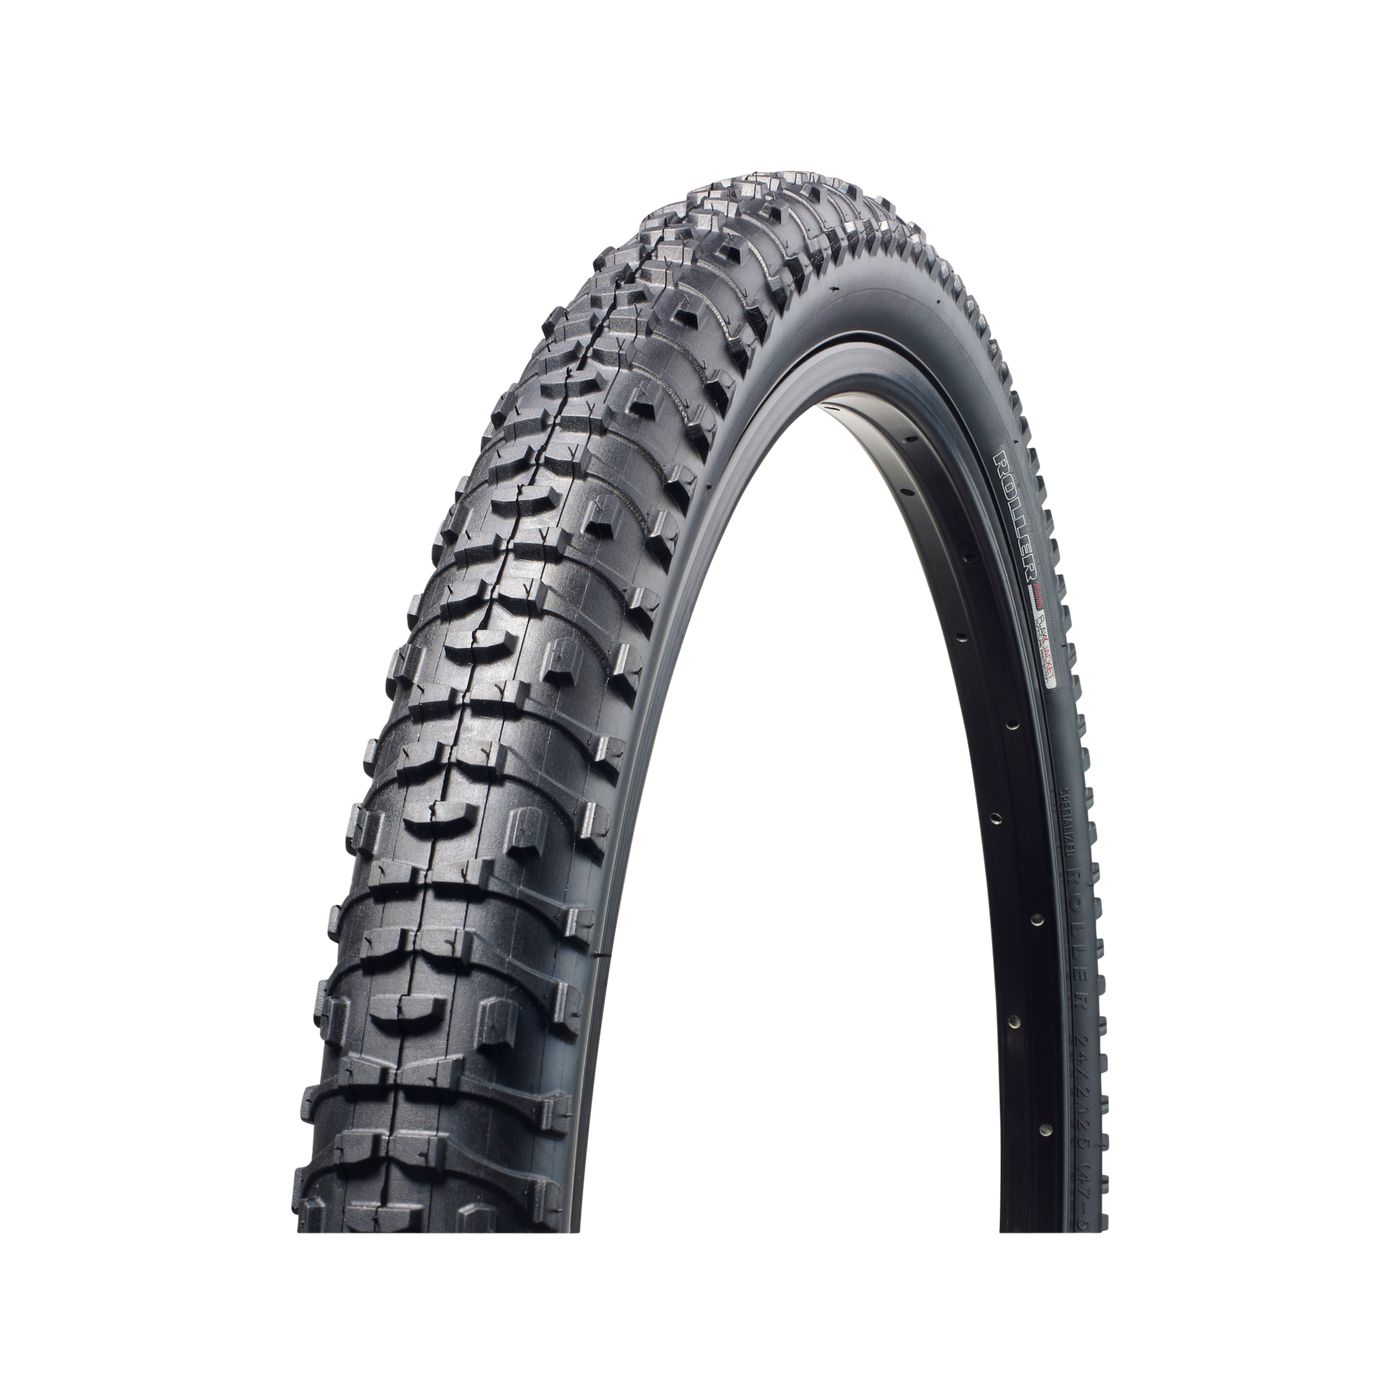 Specialized Roller 12" Bike Tire - Tires - Bicycle Warehouse